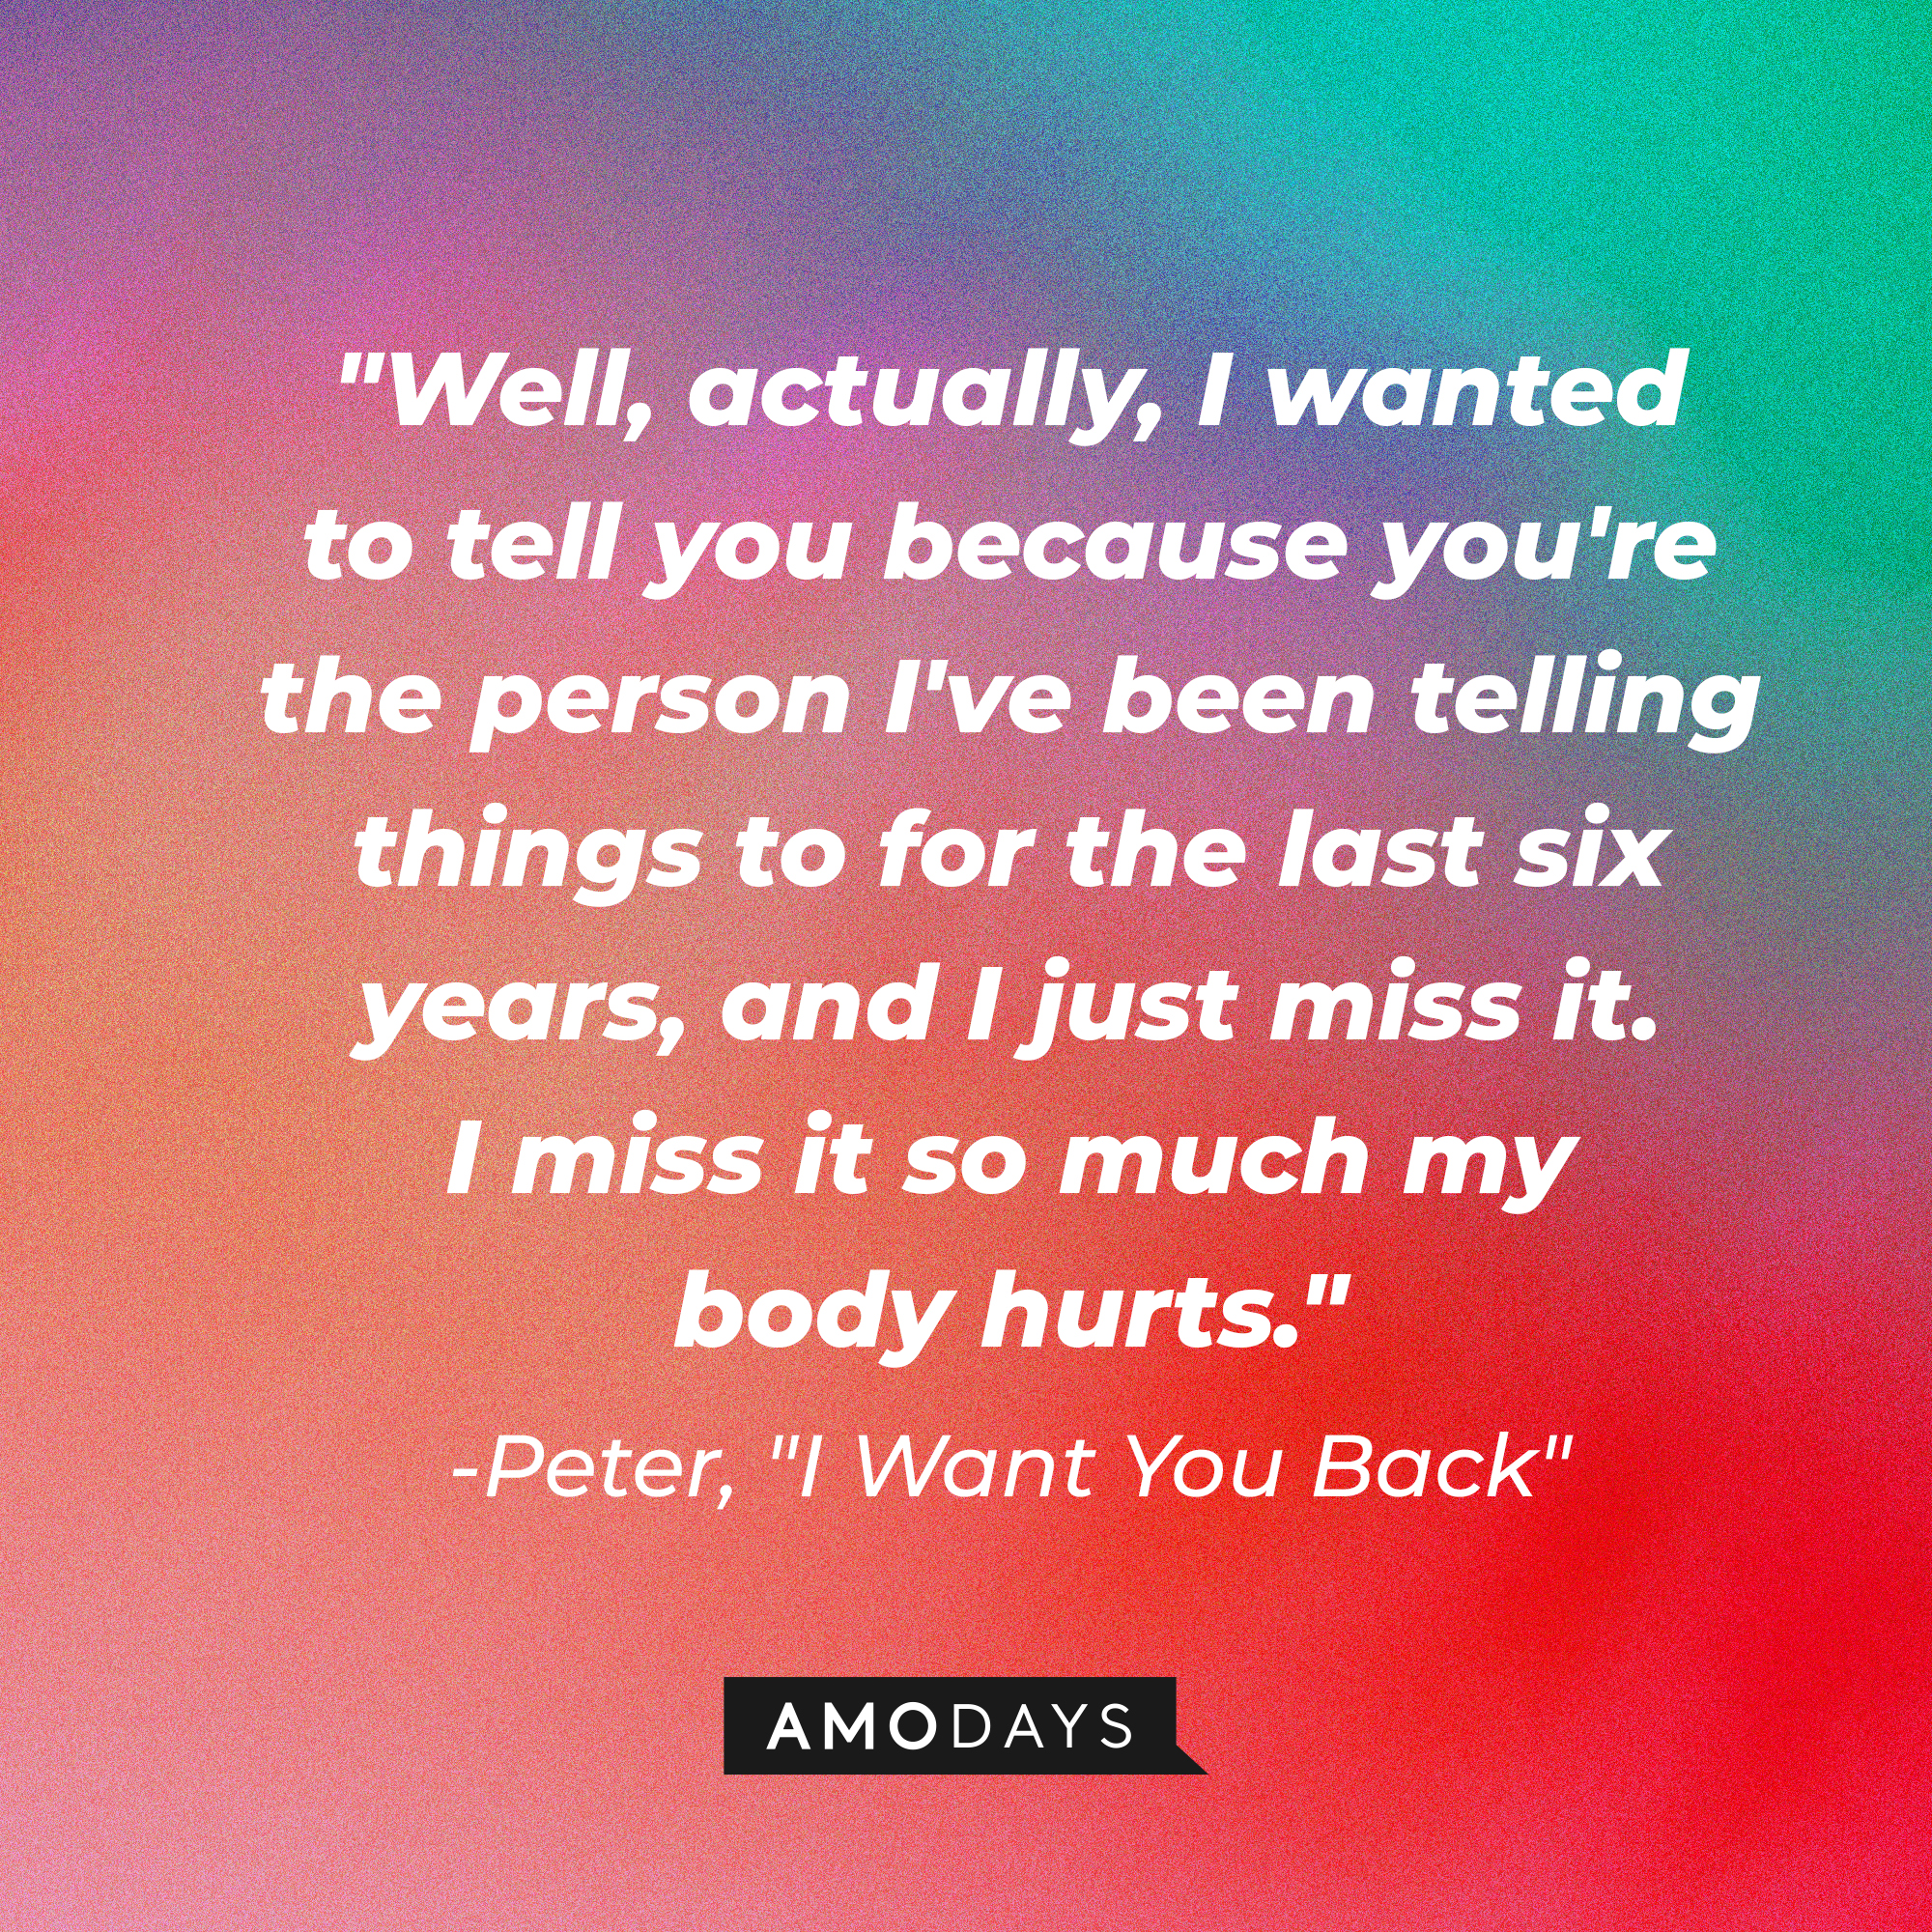 Peter's quote in "I Want You Back:" "Well, actually, I wanted to tell you because you're the person I've been telling things to for the last six years, and I just miss it. I miss it so much my body hurts."  | Source: AmoDays